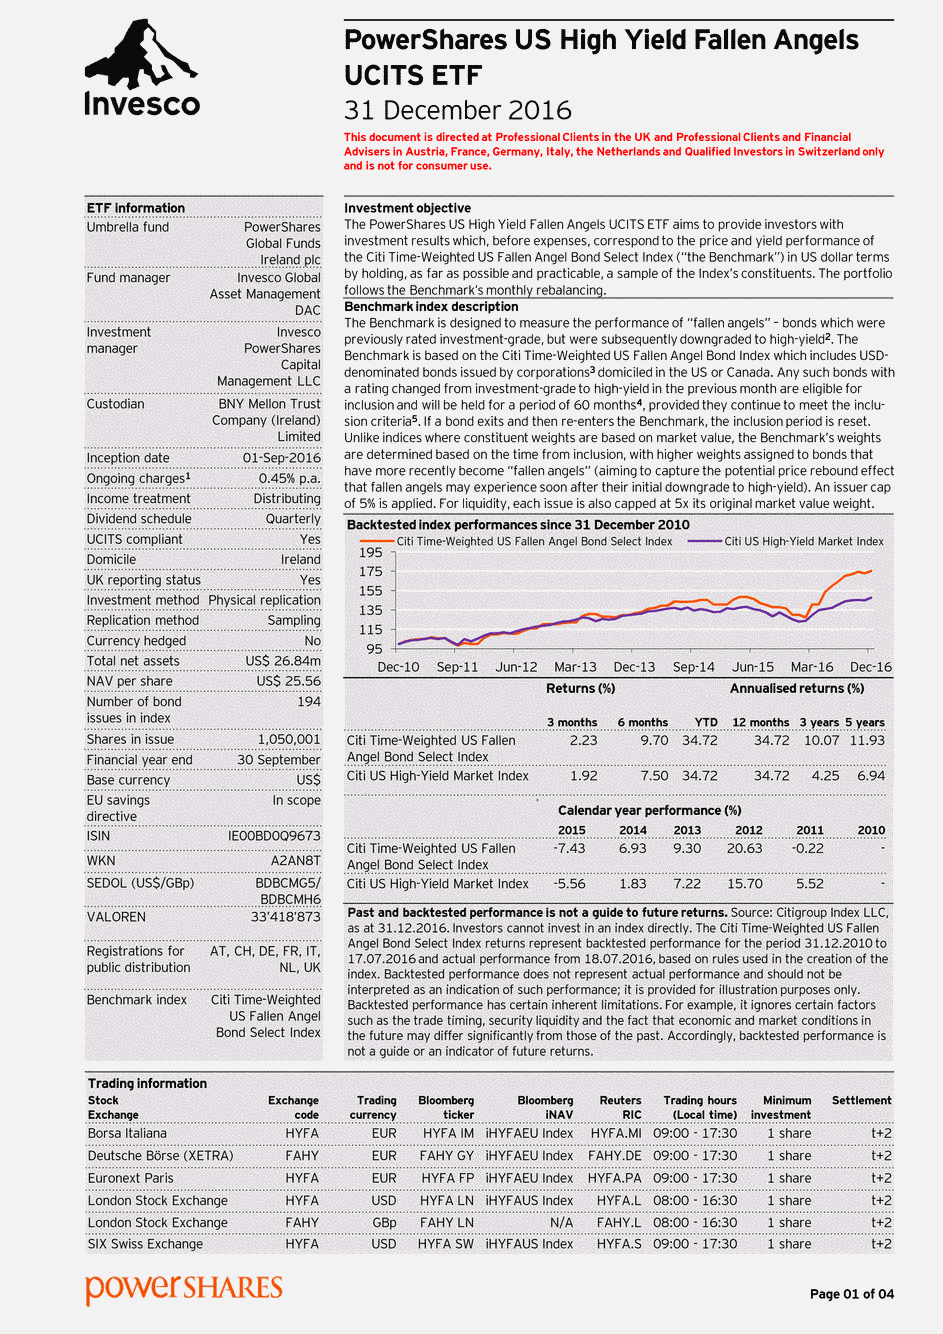 Reporting Invesco Mark. III plc - US HY Fallen Angels UCITS ETF - 31/12/2016 - Anglais